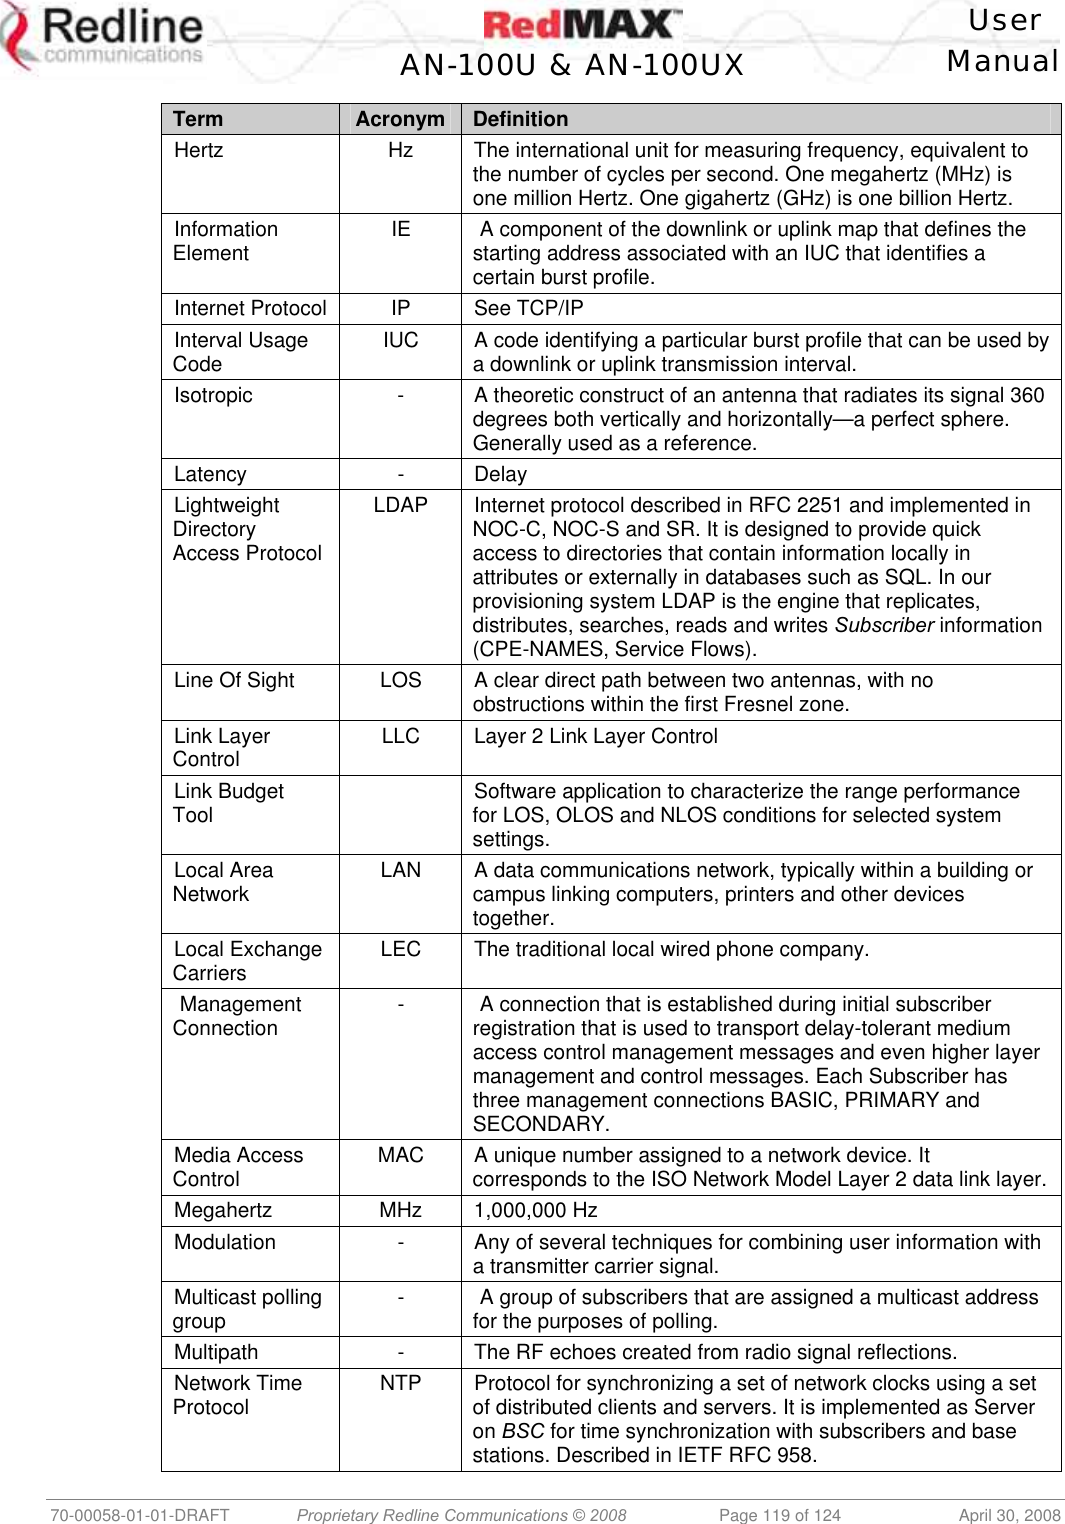    User  AN-100U &amp; AN-100UX Manual   70-00058-01-01-DRAFT  Proprietary Redline Communications © 2008   Page 119 of 124  April 30, 2008 Term  Acronym  Definition Hertz   Hz  The international unit for measuring frequency, equivalent to the number of cycles per second. One megahertz (MHz) is one million Hertz. One gigahertz (GHz) is one billion Hertz.  Information Element   IE   A component of the downlink or uplink map that defines the starting address associated with an IUC that identifies a certain burst profile. Internet Protocol  IP  See TCP/IP Interval Usage Code   IUC  A code identifying a particular burst profile that can be used by a downlink or uplink transmission interval. Isotropic   -  A theoretic construct of an antenna that radiates its signal 360 degrees both vertically and horizontally—a perfect sphere. Generally used as a reference. Latency - Delay Lightweight Directory Access Protocol LDAP  Internet protocol described in RFC 2251 and implemented in NOC-C, NOC-S and SR. It is designed to provide quick access to directories that contain information locally in attributes or externally in databases such as SQL. In our provisioning system LDAP is the engine that replicates, distributes, searches, reads and writes Subscriber information (CPE-NAMES, Service Flows).  Line Of Sight  LOS  A clear direct path between two antennas, with no obstructions within the first Fresnel zone. Link Layer Control  LLC  Layer 2 Link Layer Control Link Budget Tool    Software application to characterize the range performance for LOS, OLOS and NLOS conditions for selected system settings. Local Area Network  LAN  A data communications network, typically within a building or campus linking computers, printers and other devices together.  Local Exchange Carriers  LEC  The traditional local wired phone company.   Management Connection  -   A connection that is established during initial subscriber registration that is used to transport delay-tolerant medium access control management messages and even higher layer management and control messages. Each Subscriber has three management connections BASIC, PRIMARY and SECONDARY. Media Access Control  MAC  A unique number assigned to a network device. It corresponds to the ISO Network Model Layer 2 data link layer. Megahertz MHz 1,000,000 Hz Modulation   -  Any of several techniques for combining user information with a transmitter carrier signal. Multicast polling group  -   A group of subscribers that are assigned a multicast address for the purposes of polling. Multipath   -  The RF echoes created from radio signal reflections. Network Time Protocol  NTP  Protocol for synchronizing a set of network clocks using a set of distributed clients and servers. It is implemented as Server on BSC for time synchronization with subscribers and base stations. Described in IETF RFC 958. 